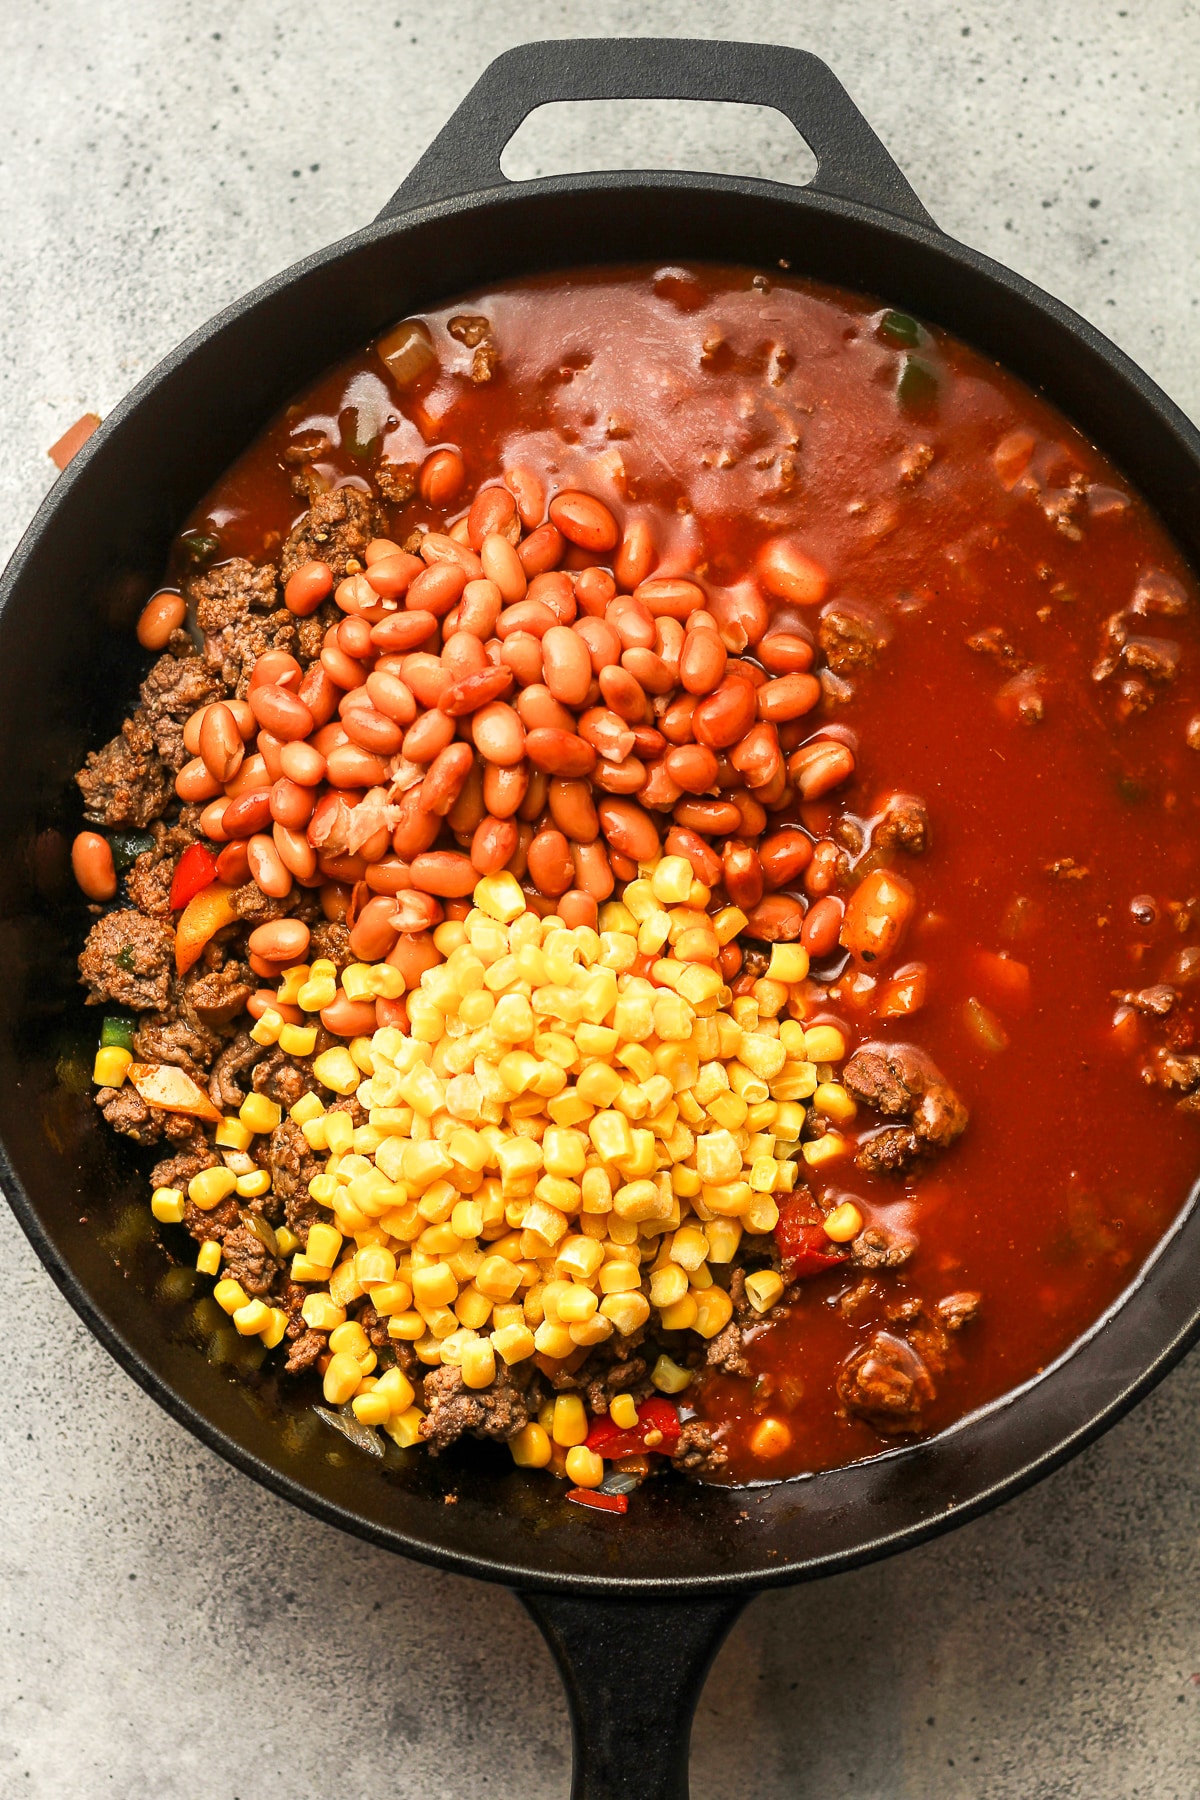 A skillet after adding the beans, corn, and enchilada sauce.